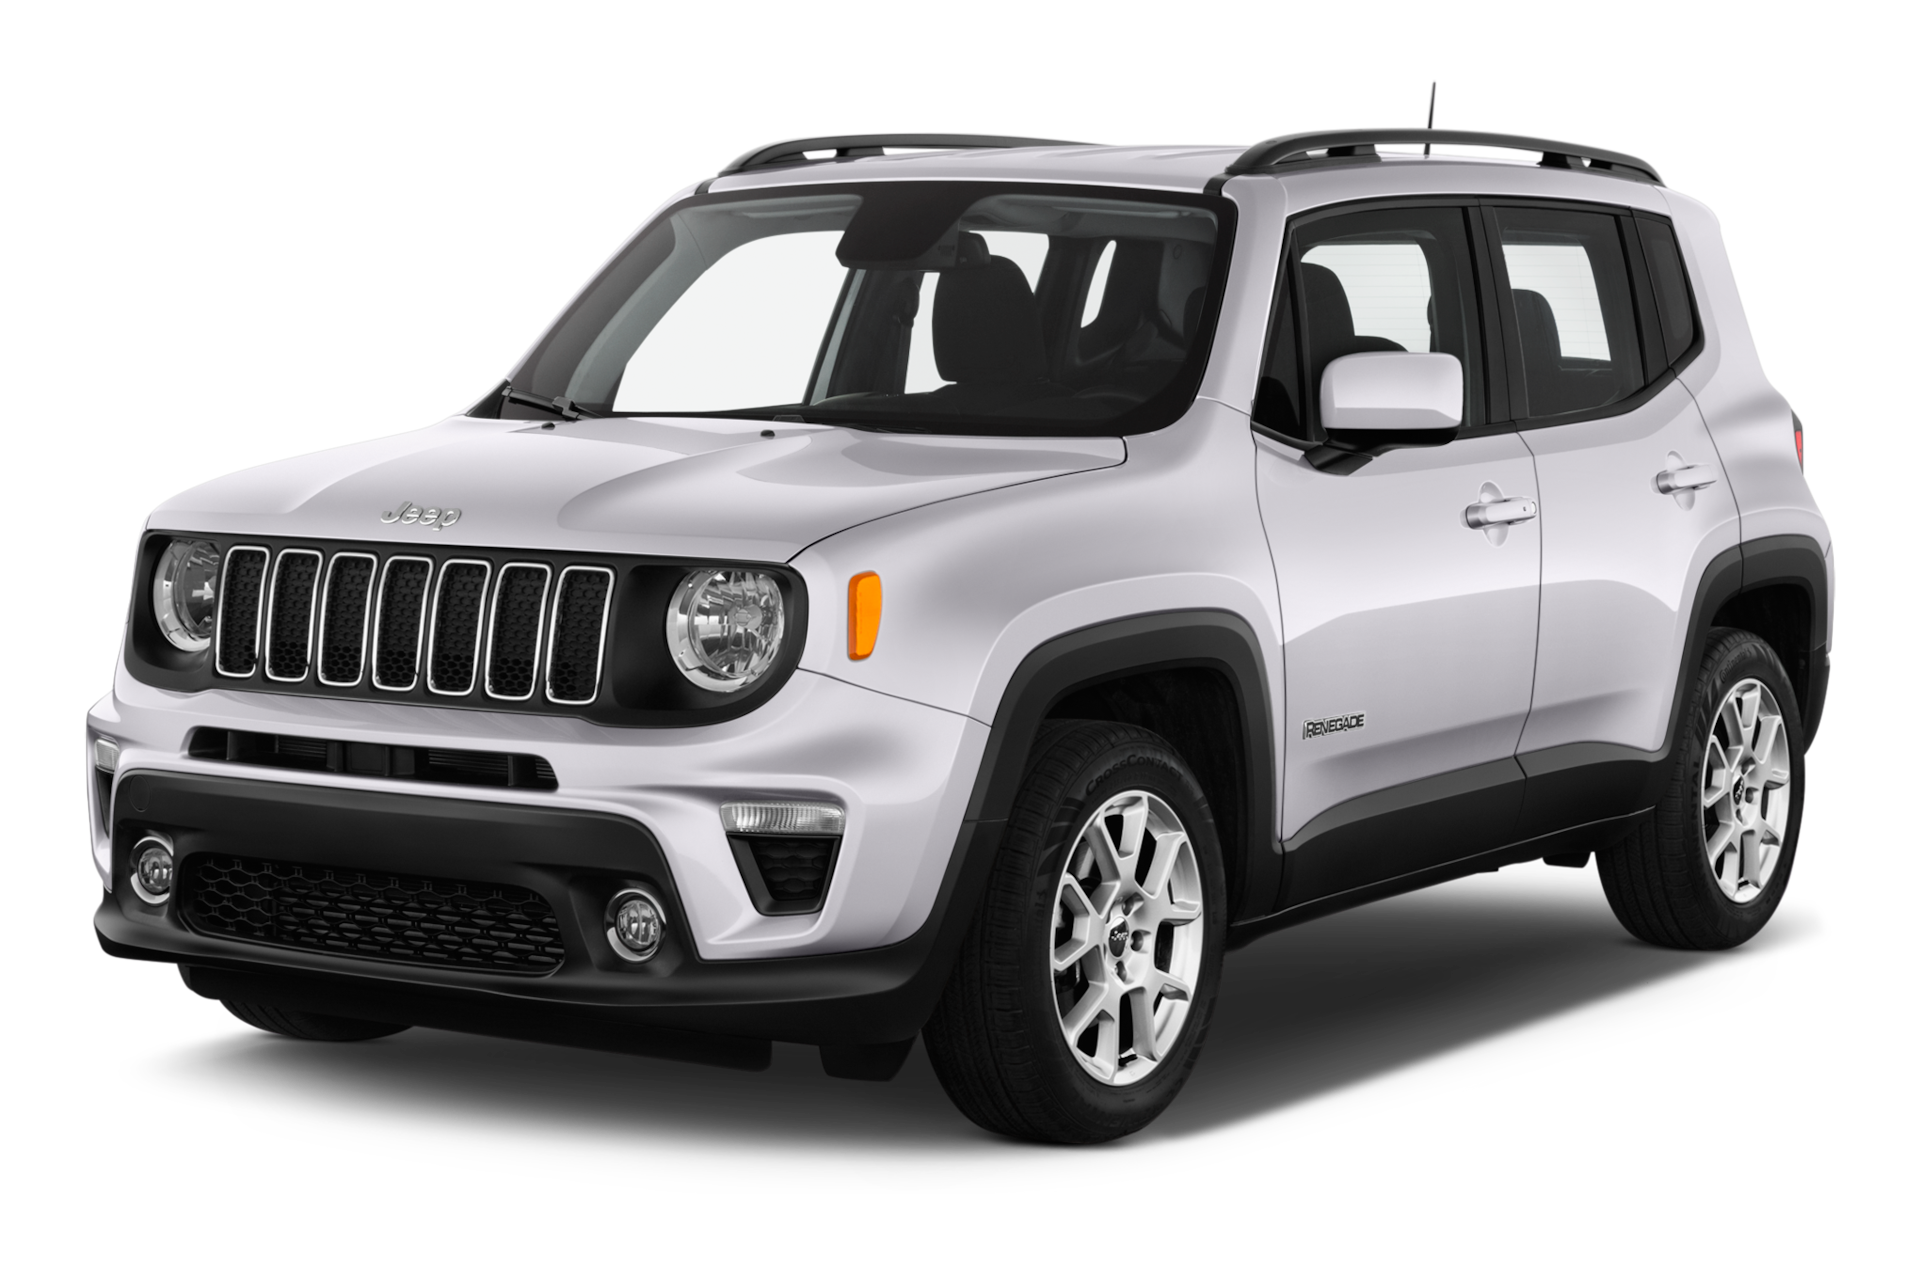 2019 Jeep Renegade Prices, Reviews, and Photos - MotorTrend